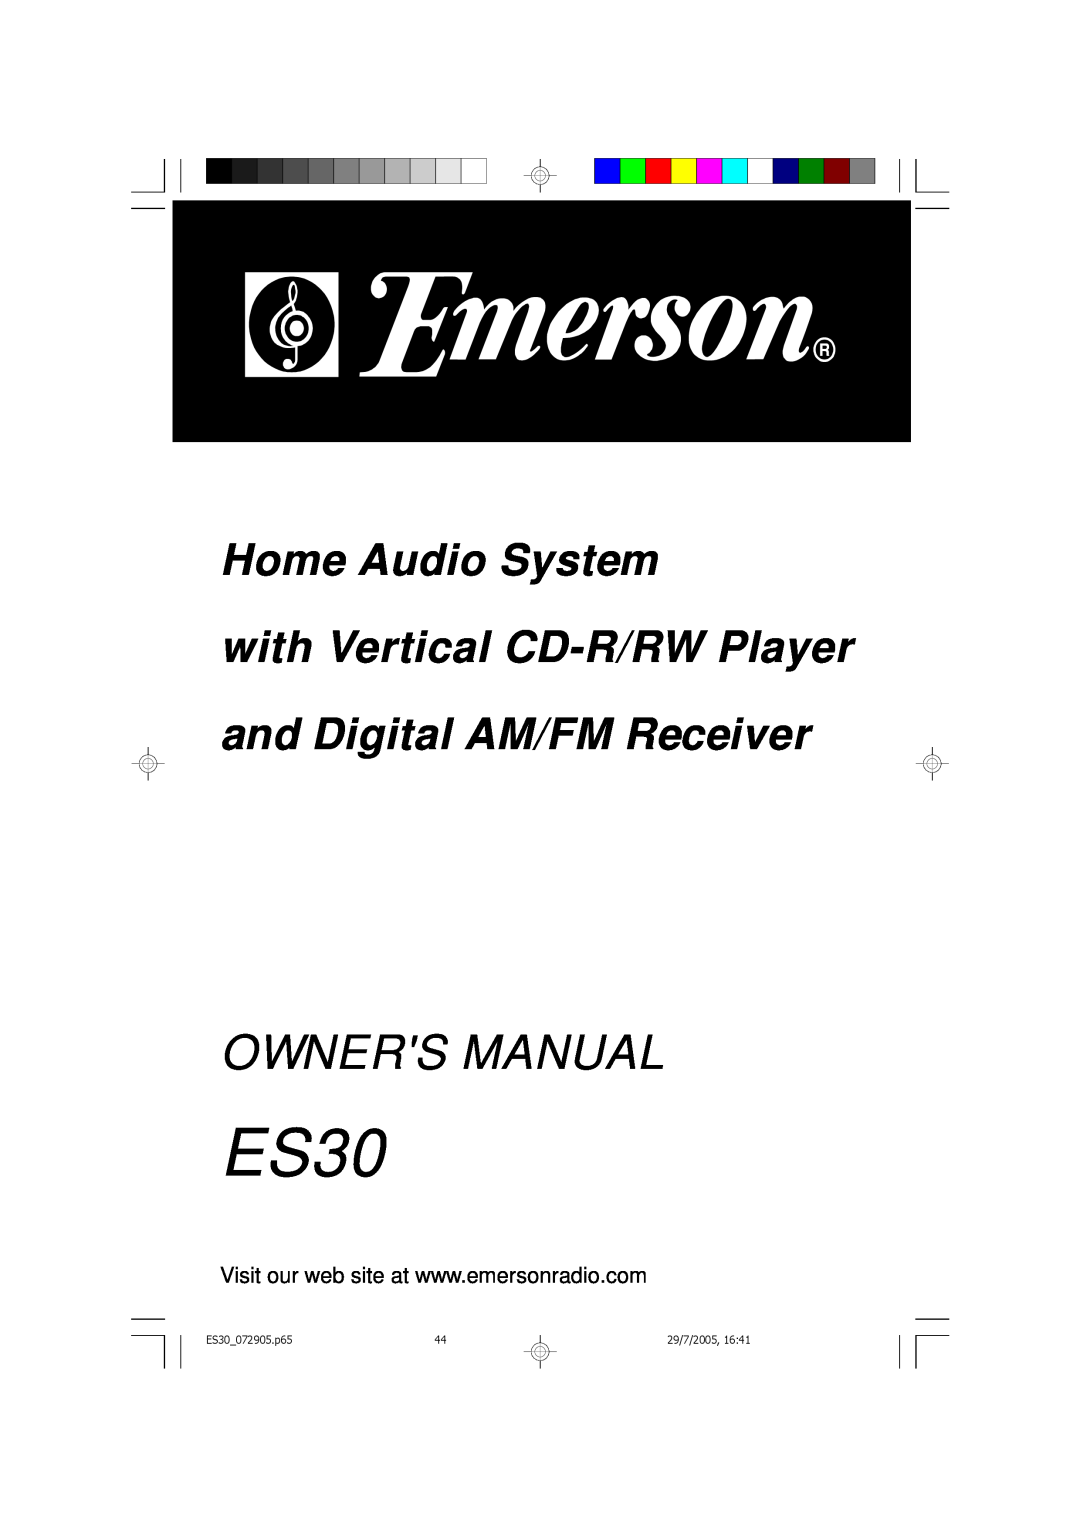 Emerson Process Management owner manual Owners Manual, Home Audio System with Vertical CD-R/RWPlayer, ES30_072905.p65 